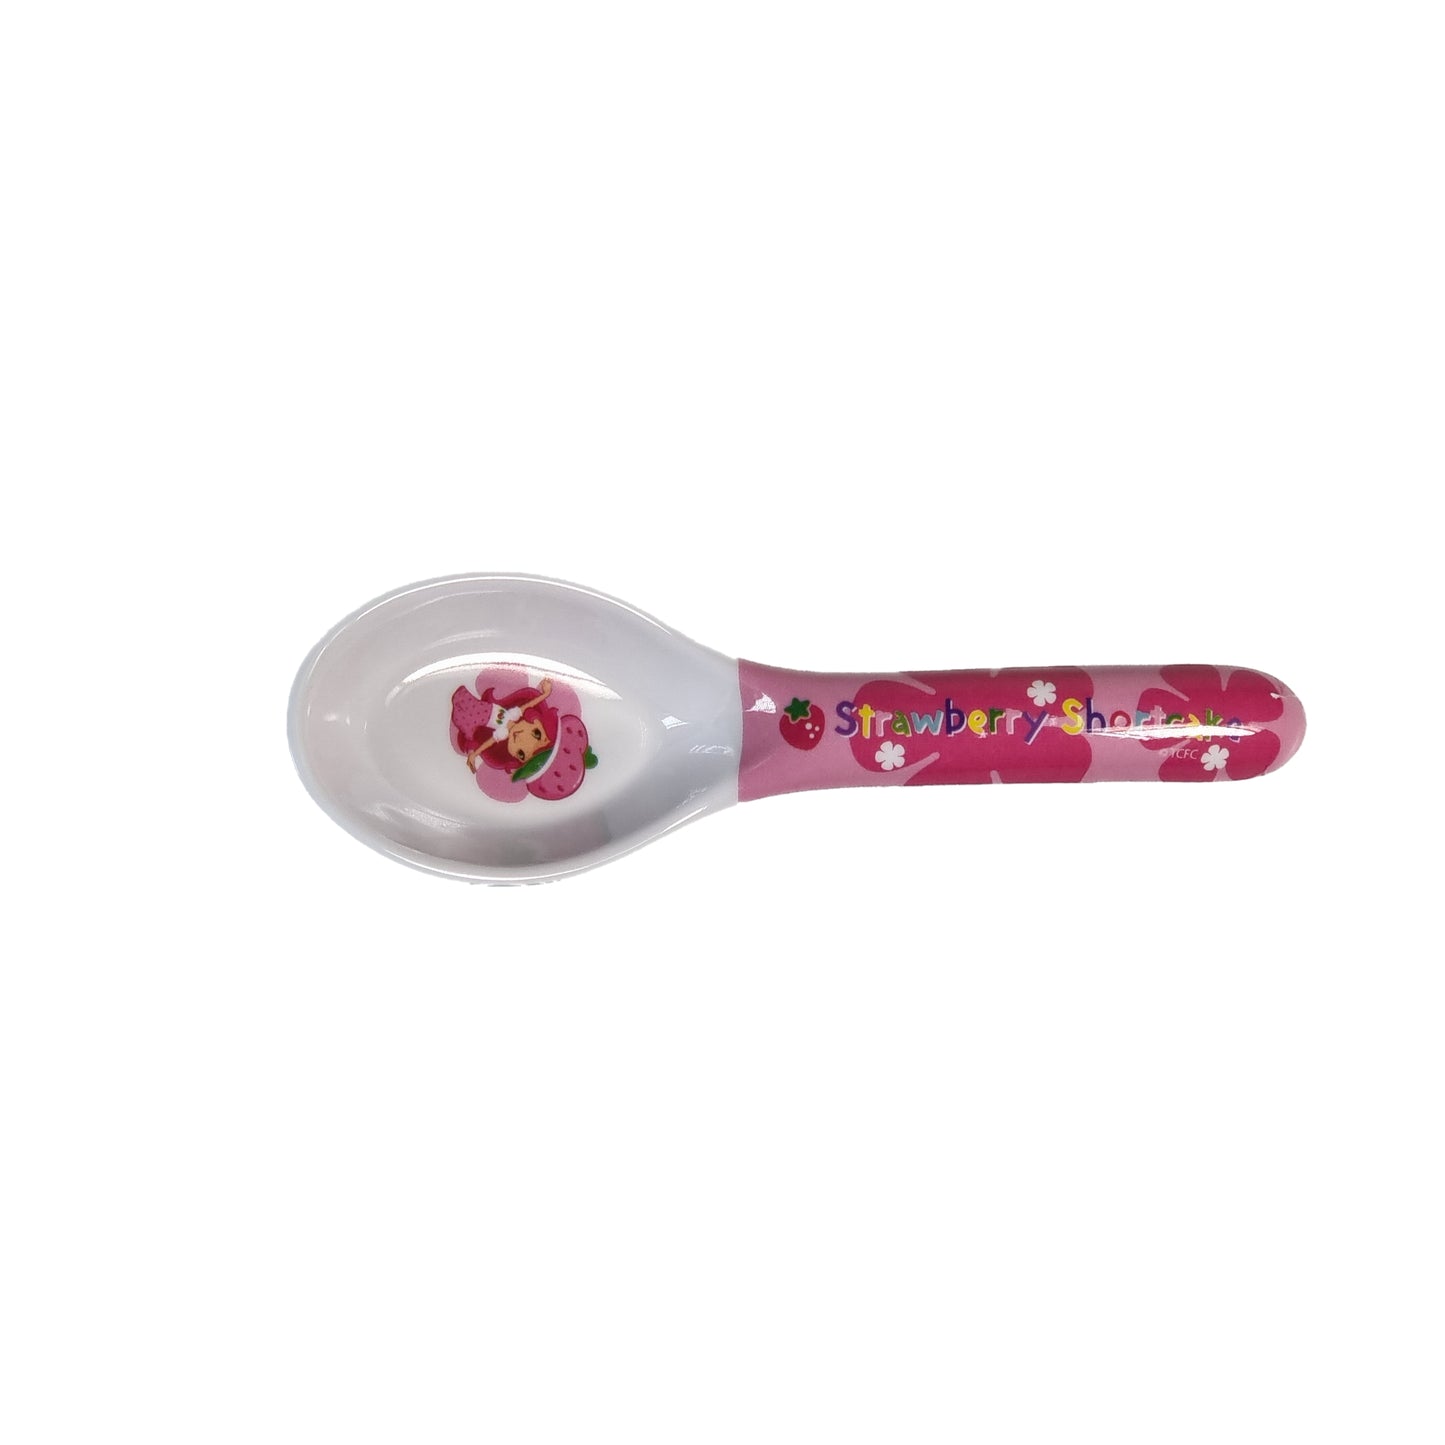 Strawberry Shortcake - Tableware, Bowl | Plate | Cup | Spoon | Fork (Different Items Available)